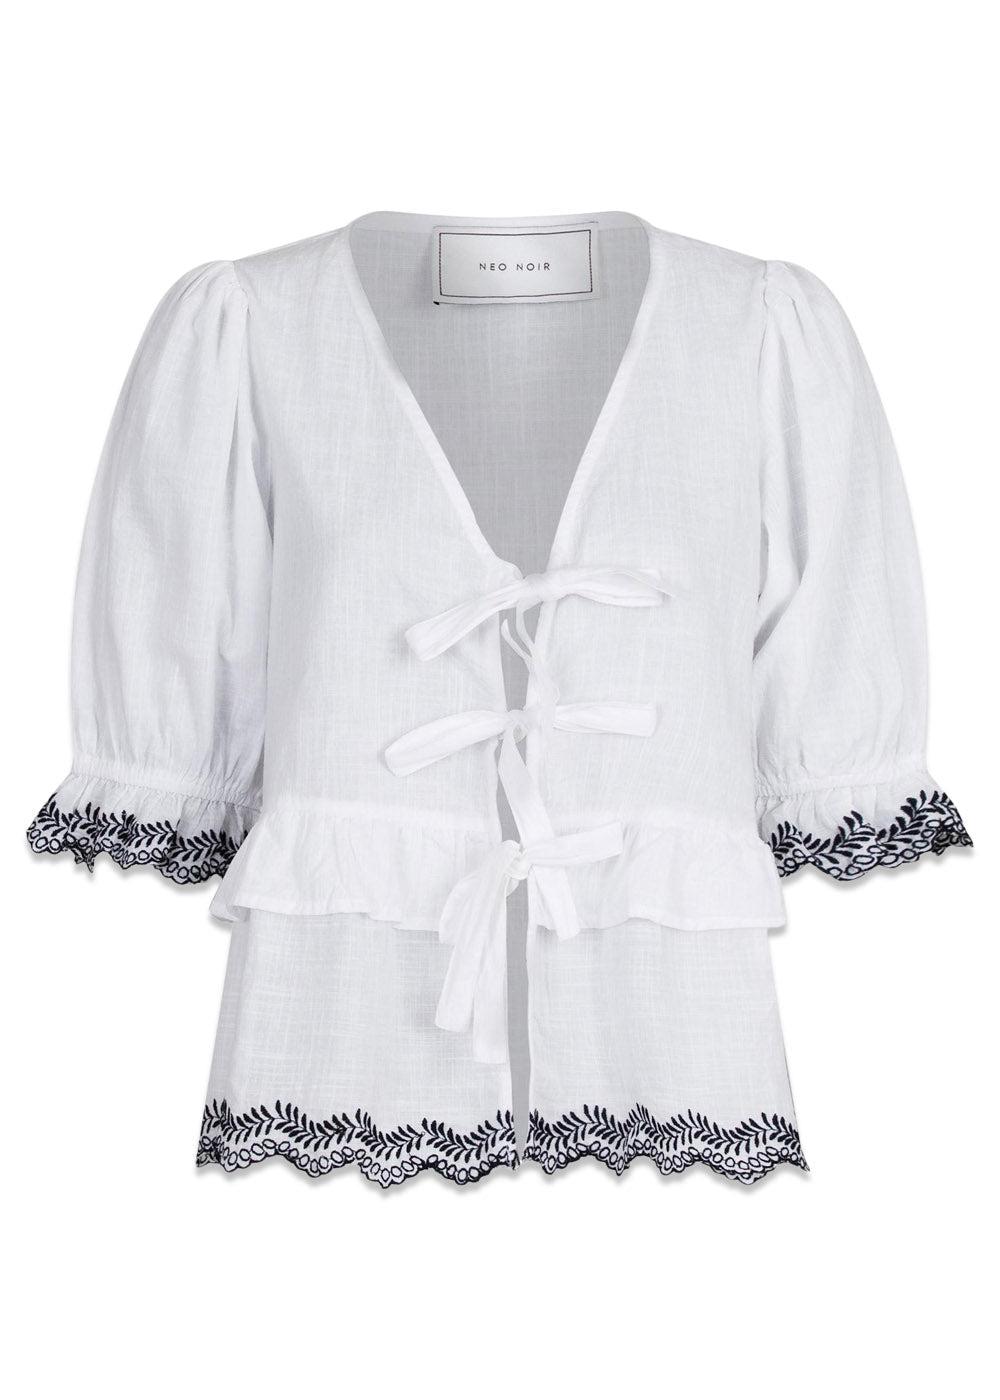 Neo Noirs Raya Embroidery Blouse - White/Black. Køb blouses her.